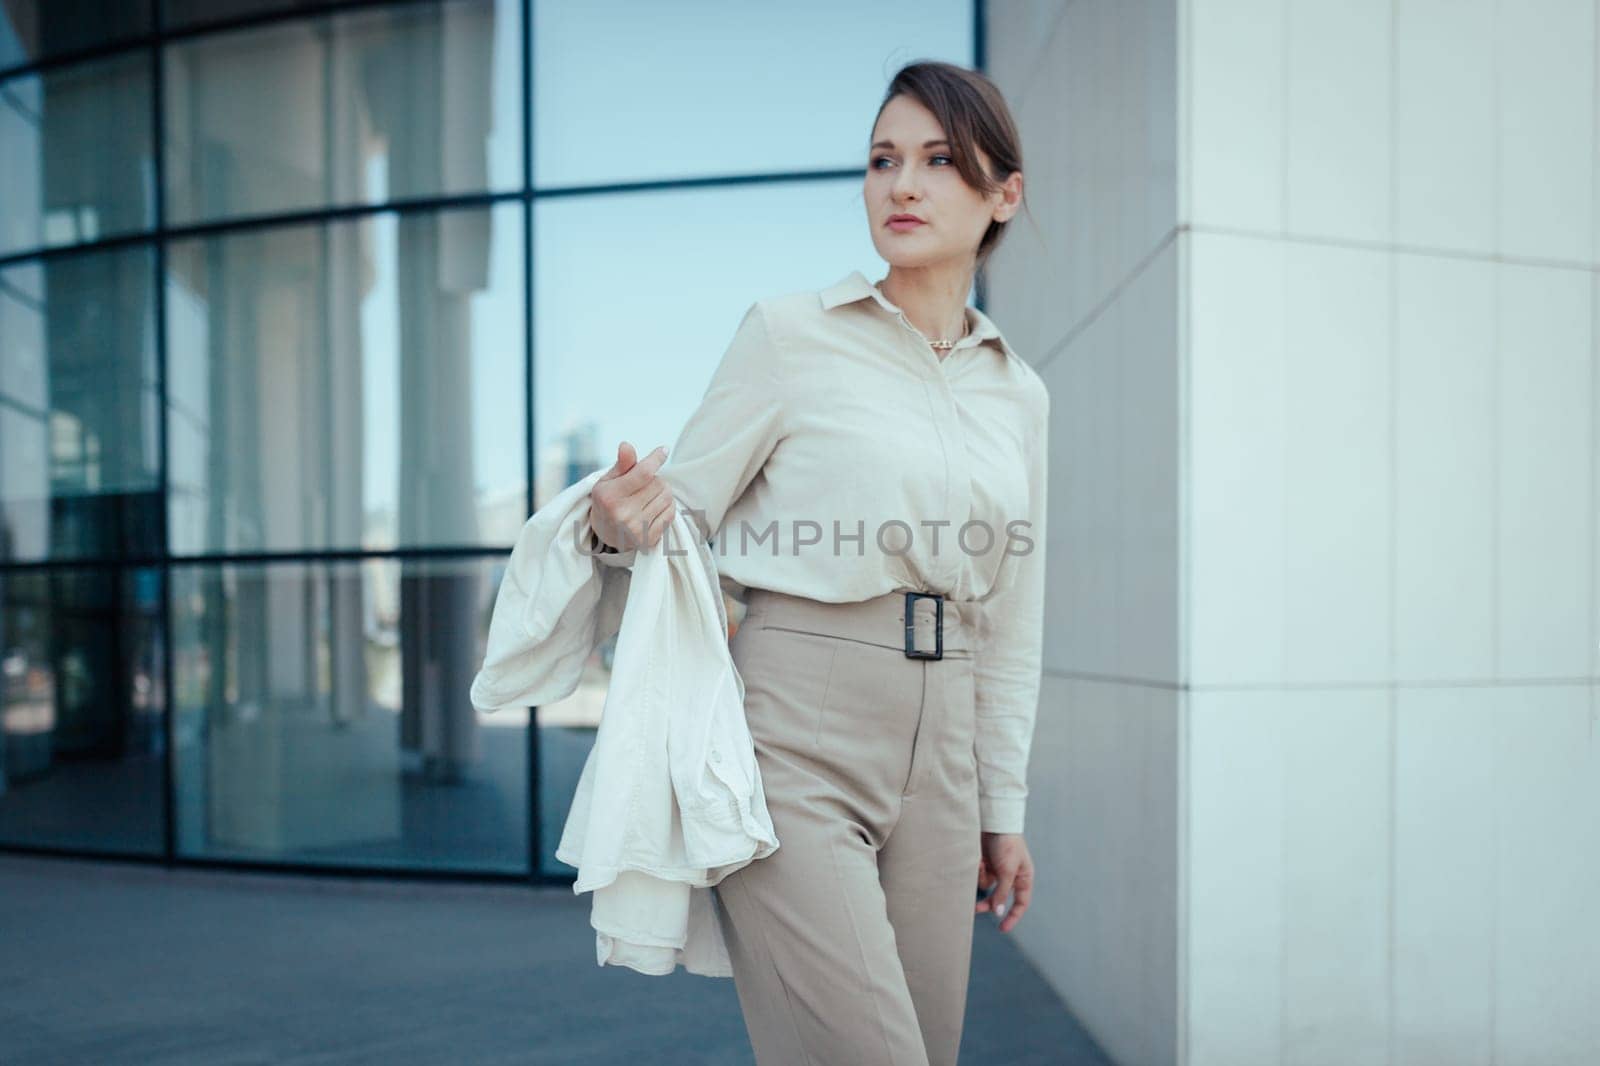 Outdoor shot of caucasian business woman, going somewhere in city centre, walking on street, going to work.